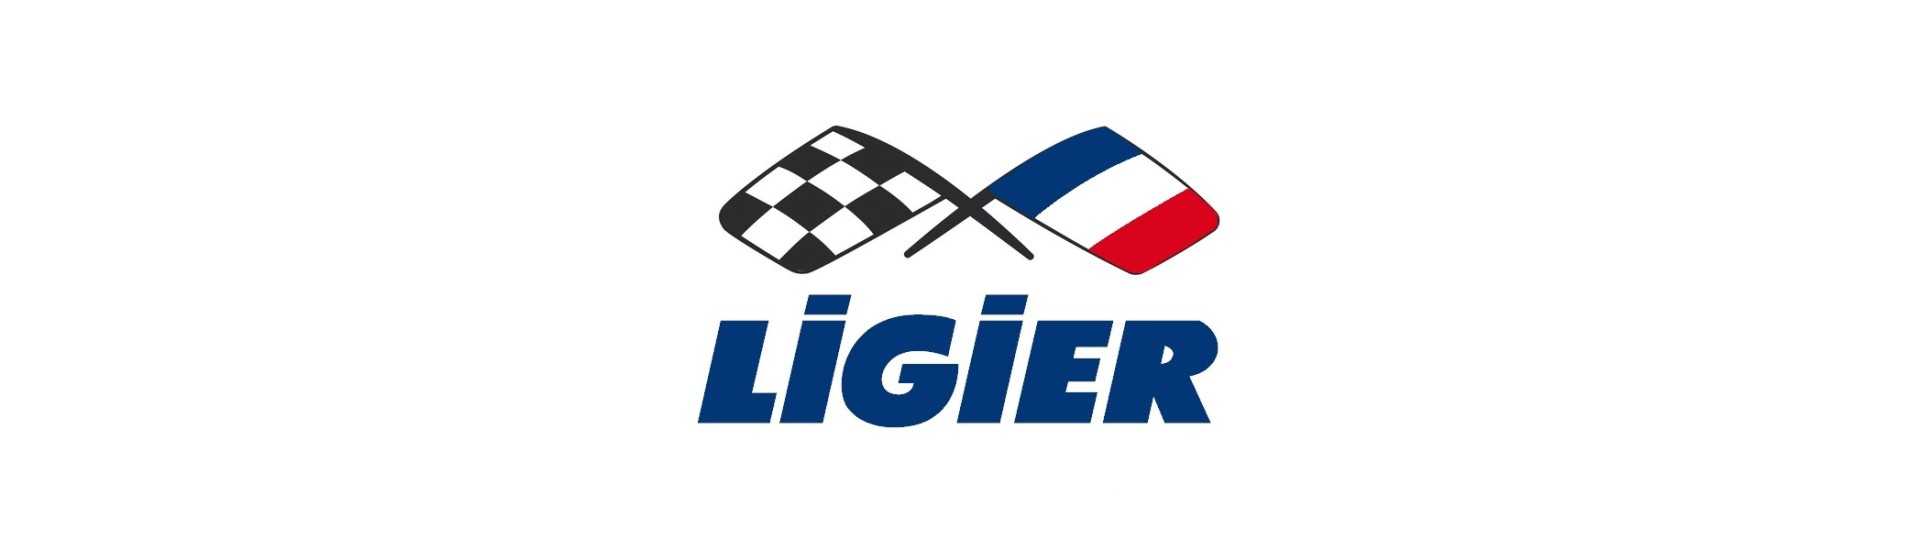 Cardan at the best price for car without a permit Ligier